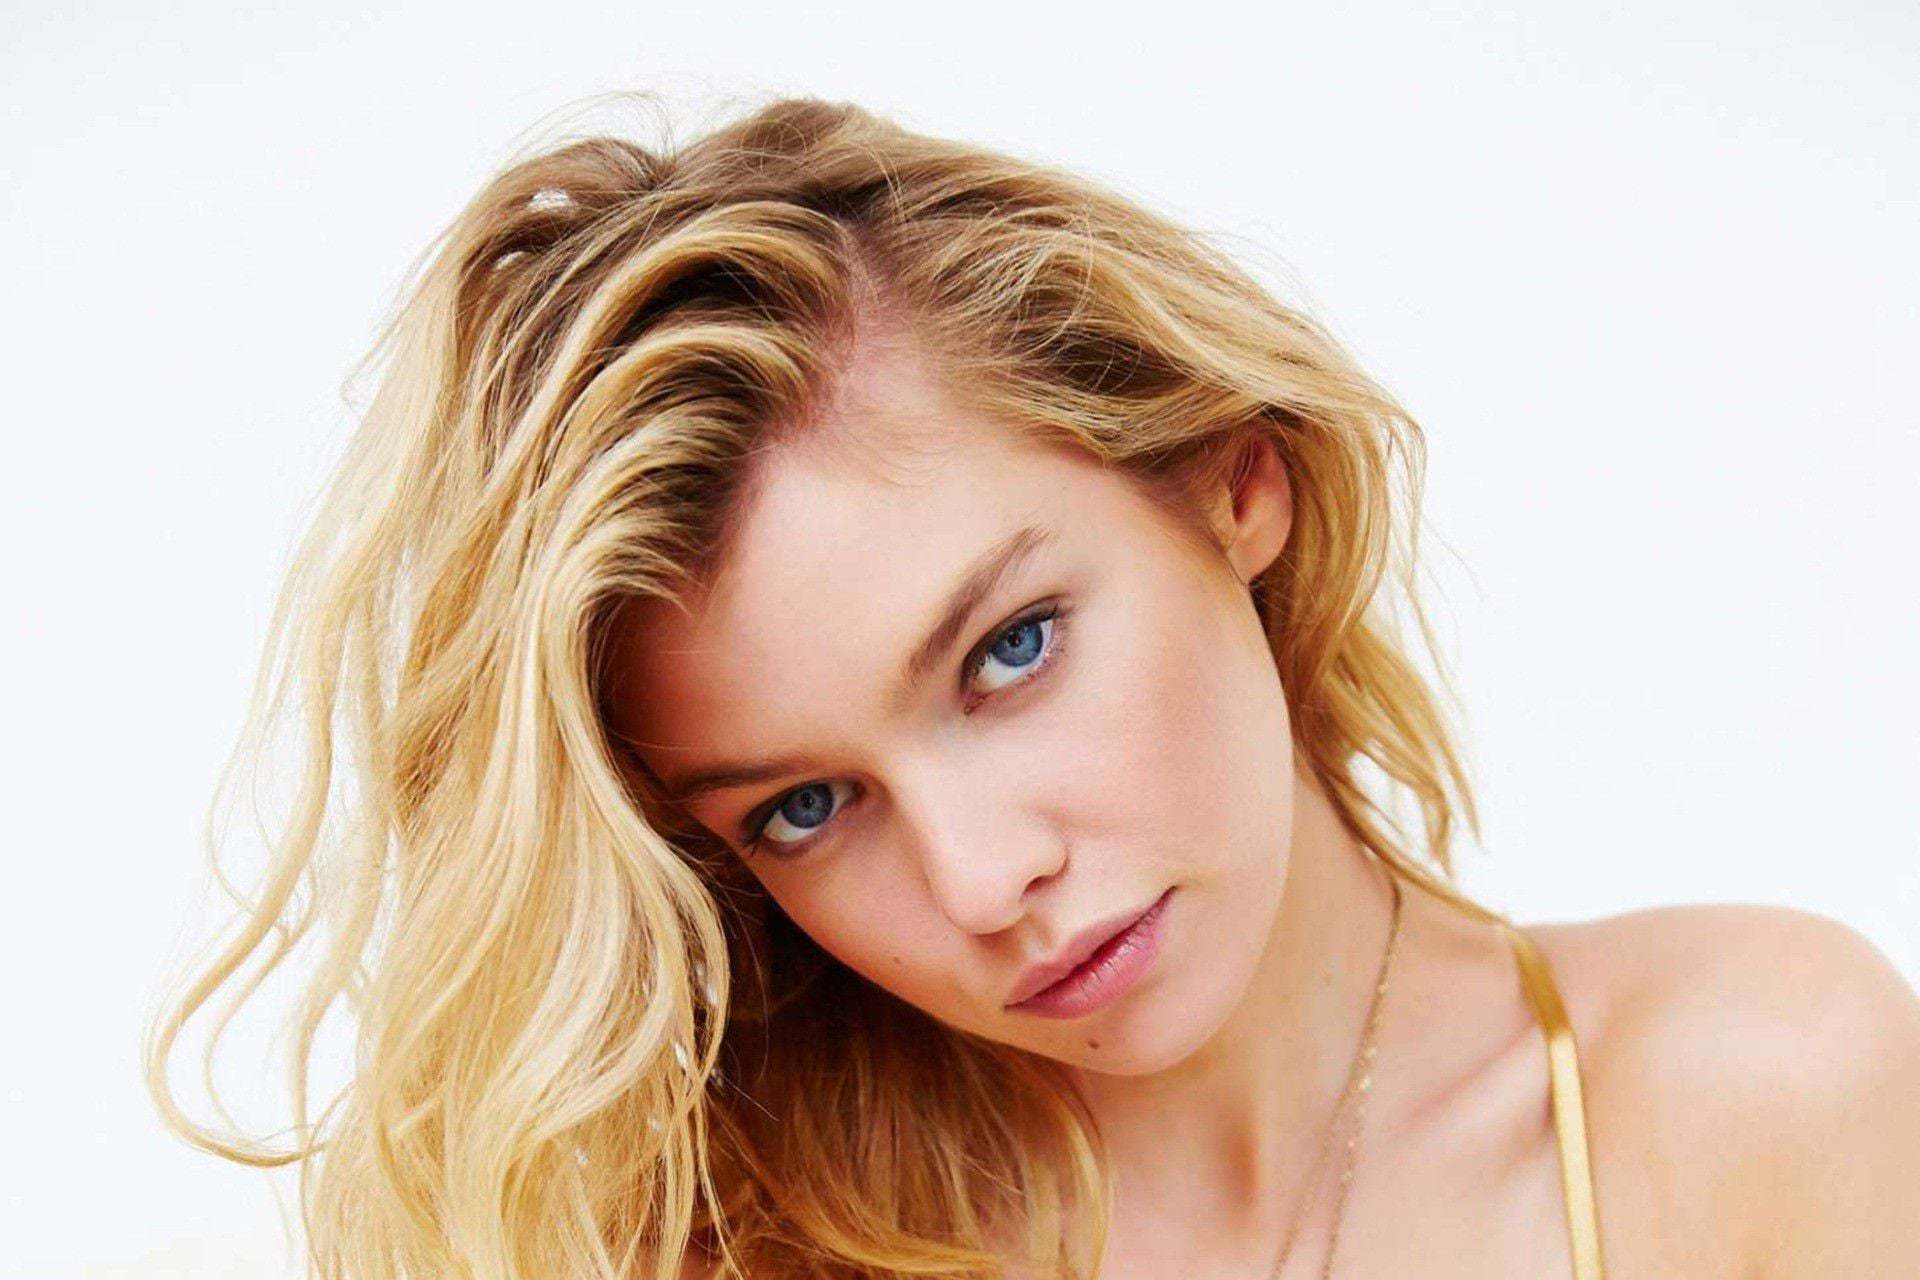 Stella Maxwell Wallpapers Images Photos Pictures Backgrounds